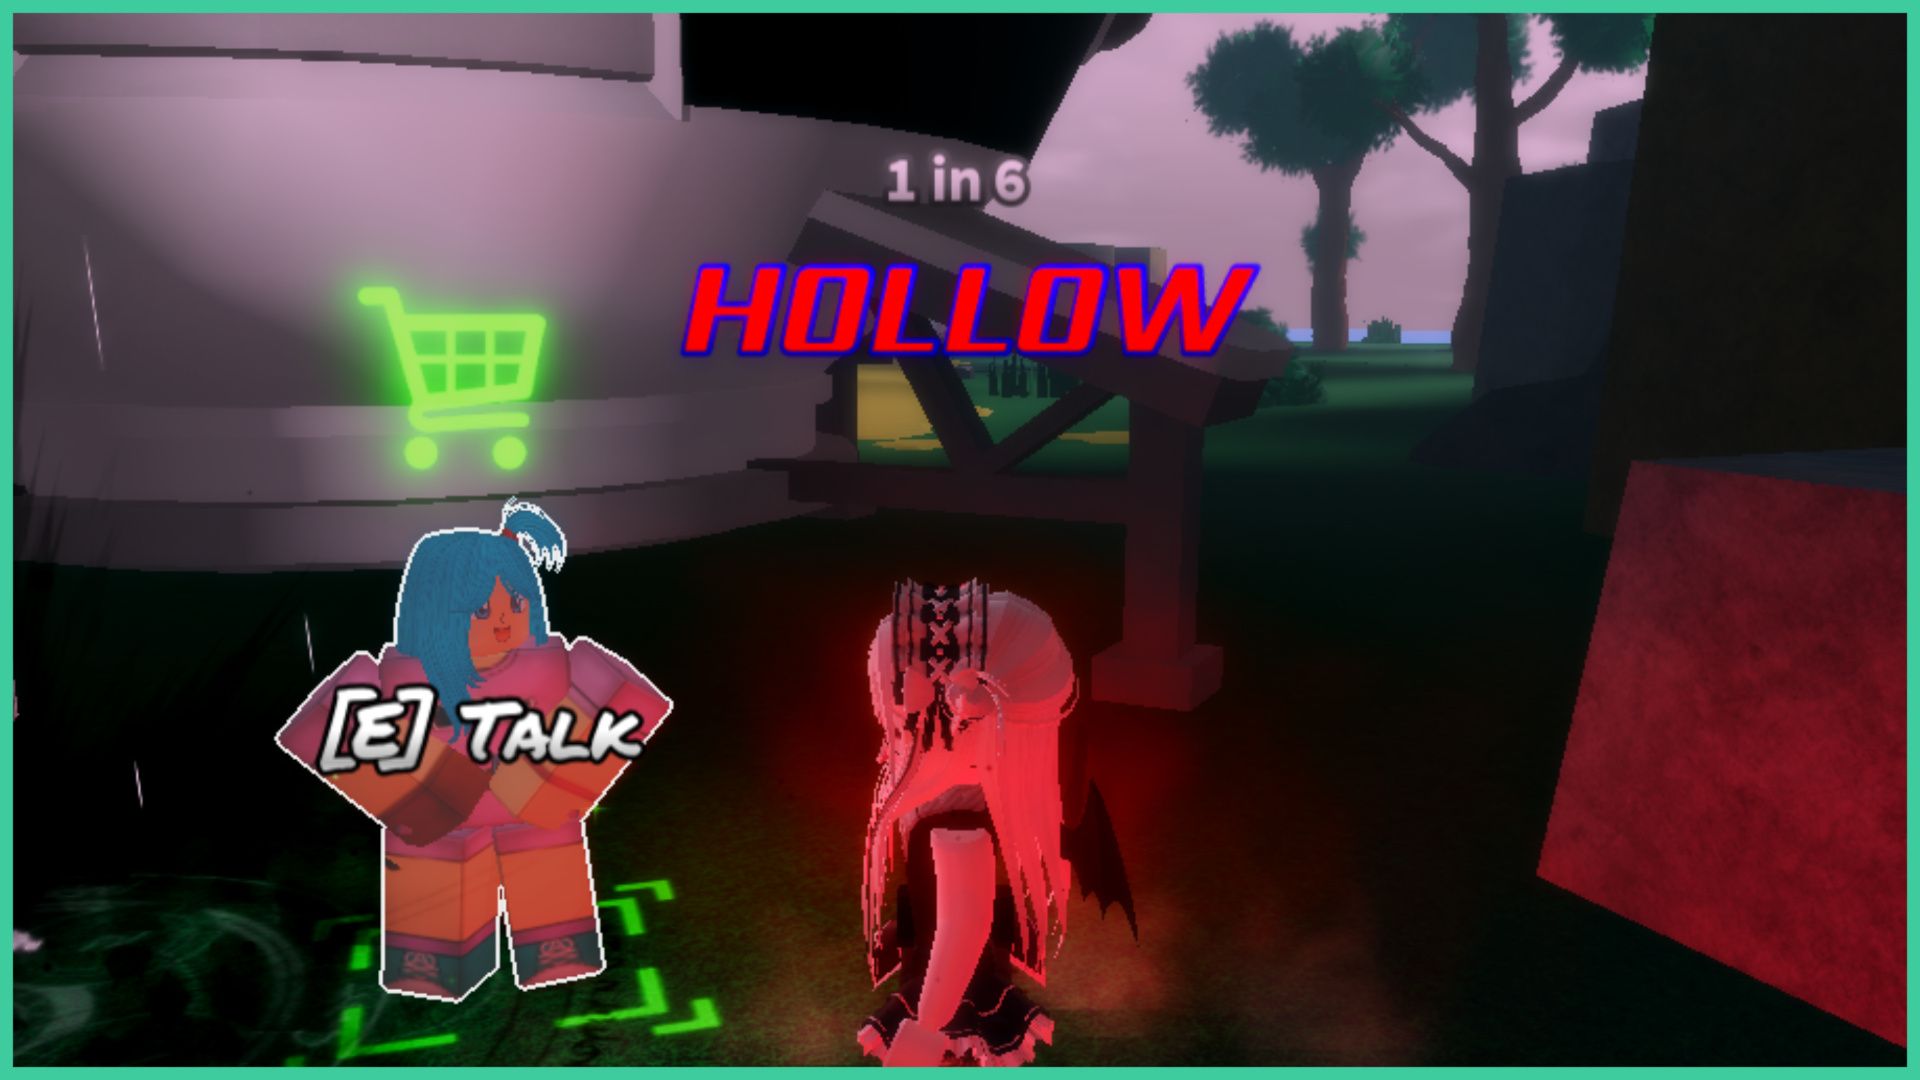 feature image for our anime roulette crafting guide, a roblox player equipped with the hollow aura which casts a red glow around them is standing next to the bulma NPC who is based on bulma from the dragon ball Z franchise, she has a shopping cart symbol above her head as she stands in front of a spaceship